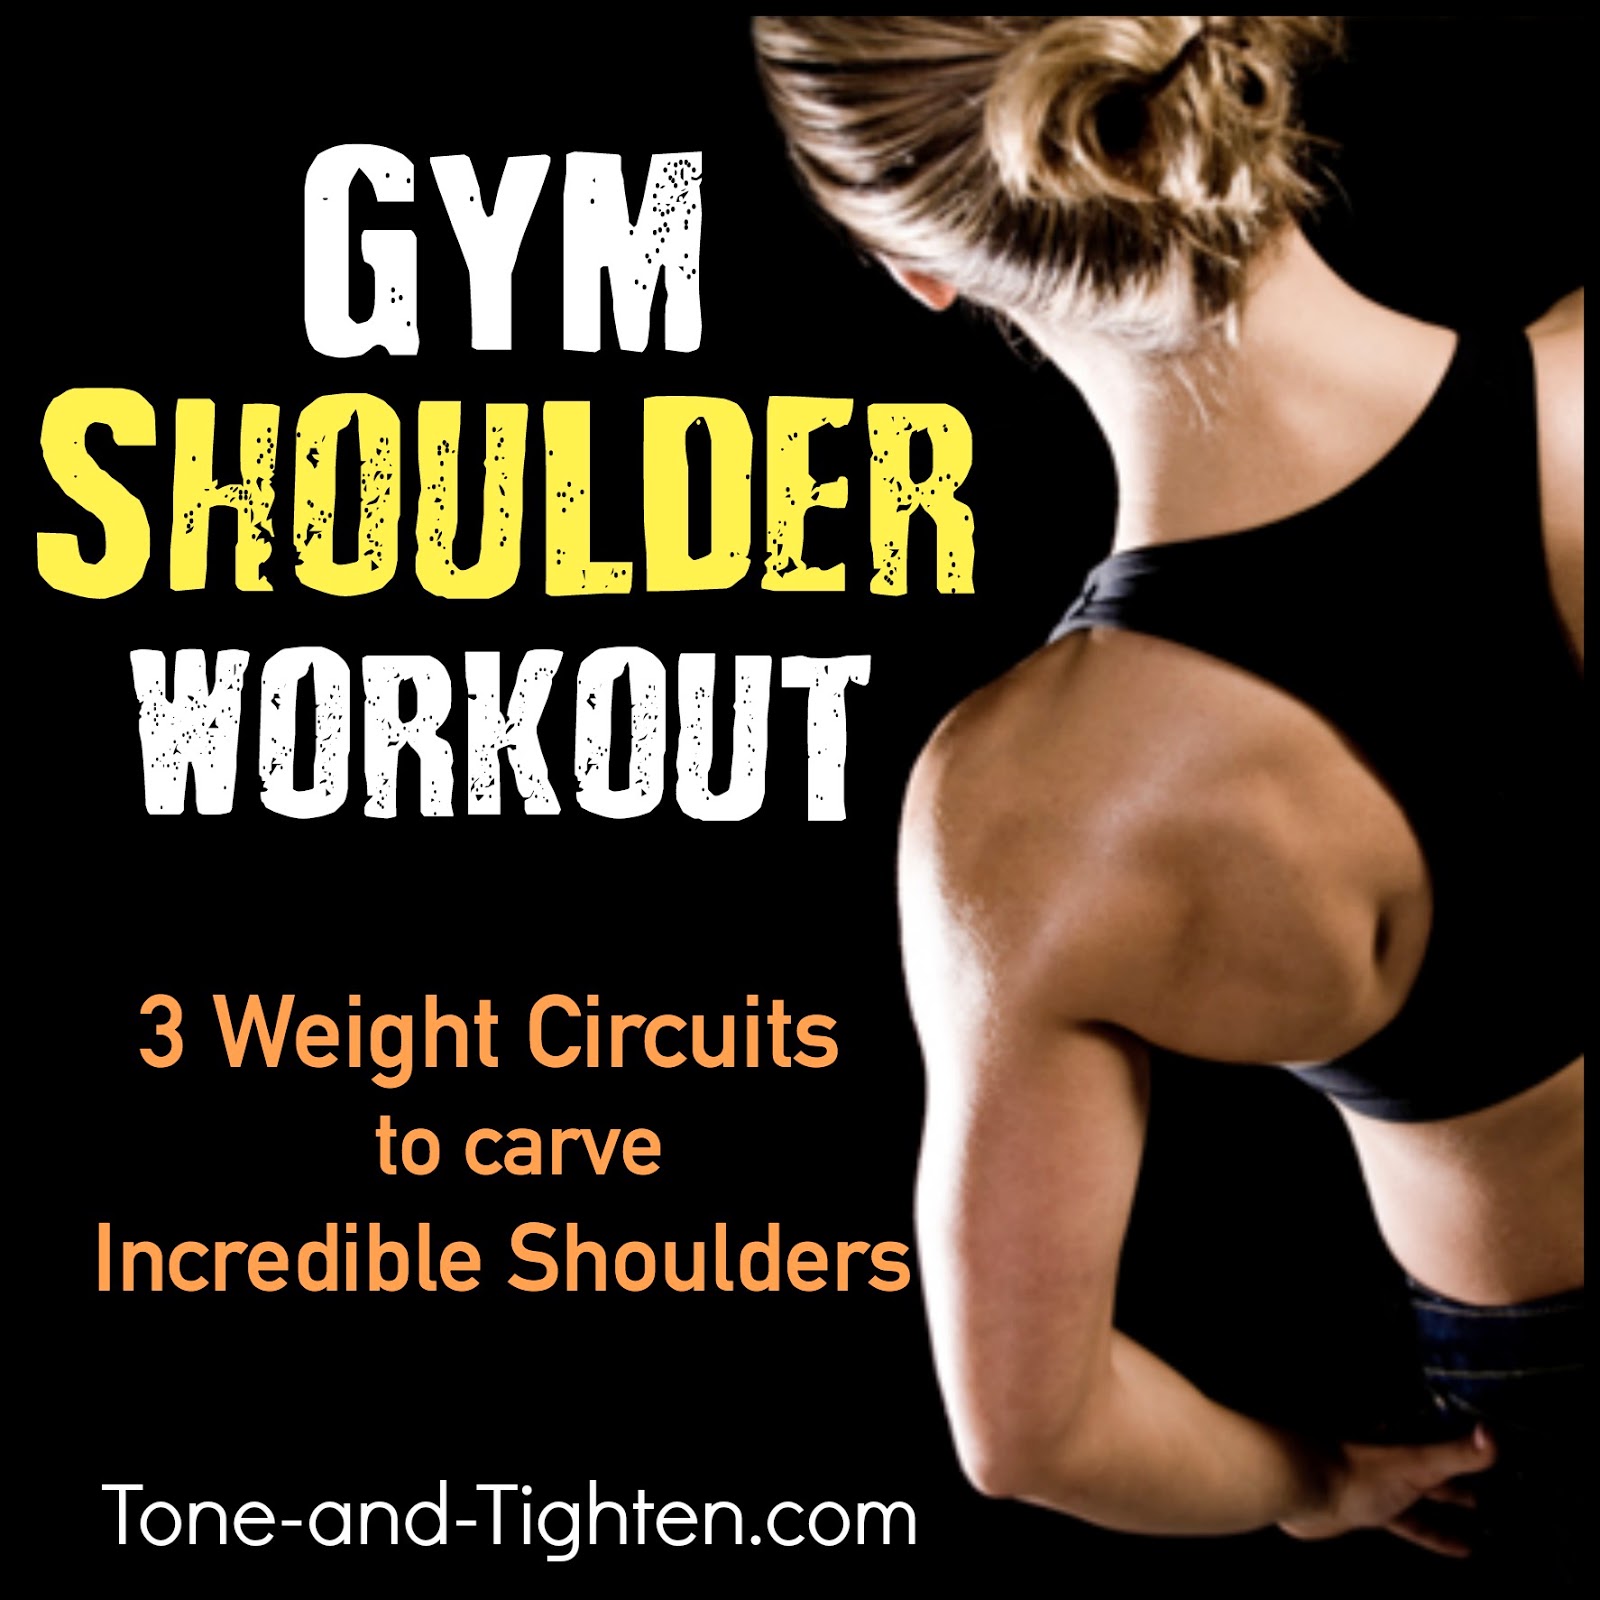 Shoulder Gym Workout – Sculpt incredible shoulders with “What I Worked Wednesday”